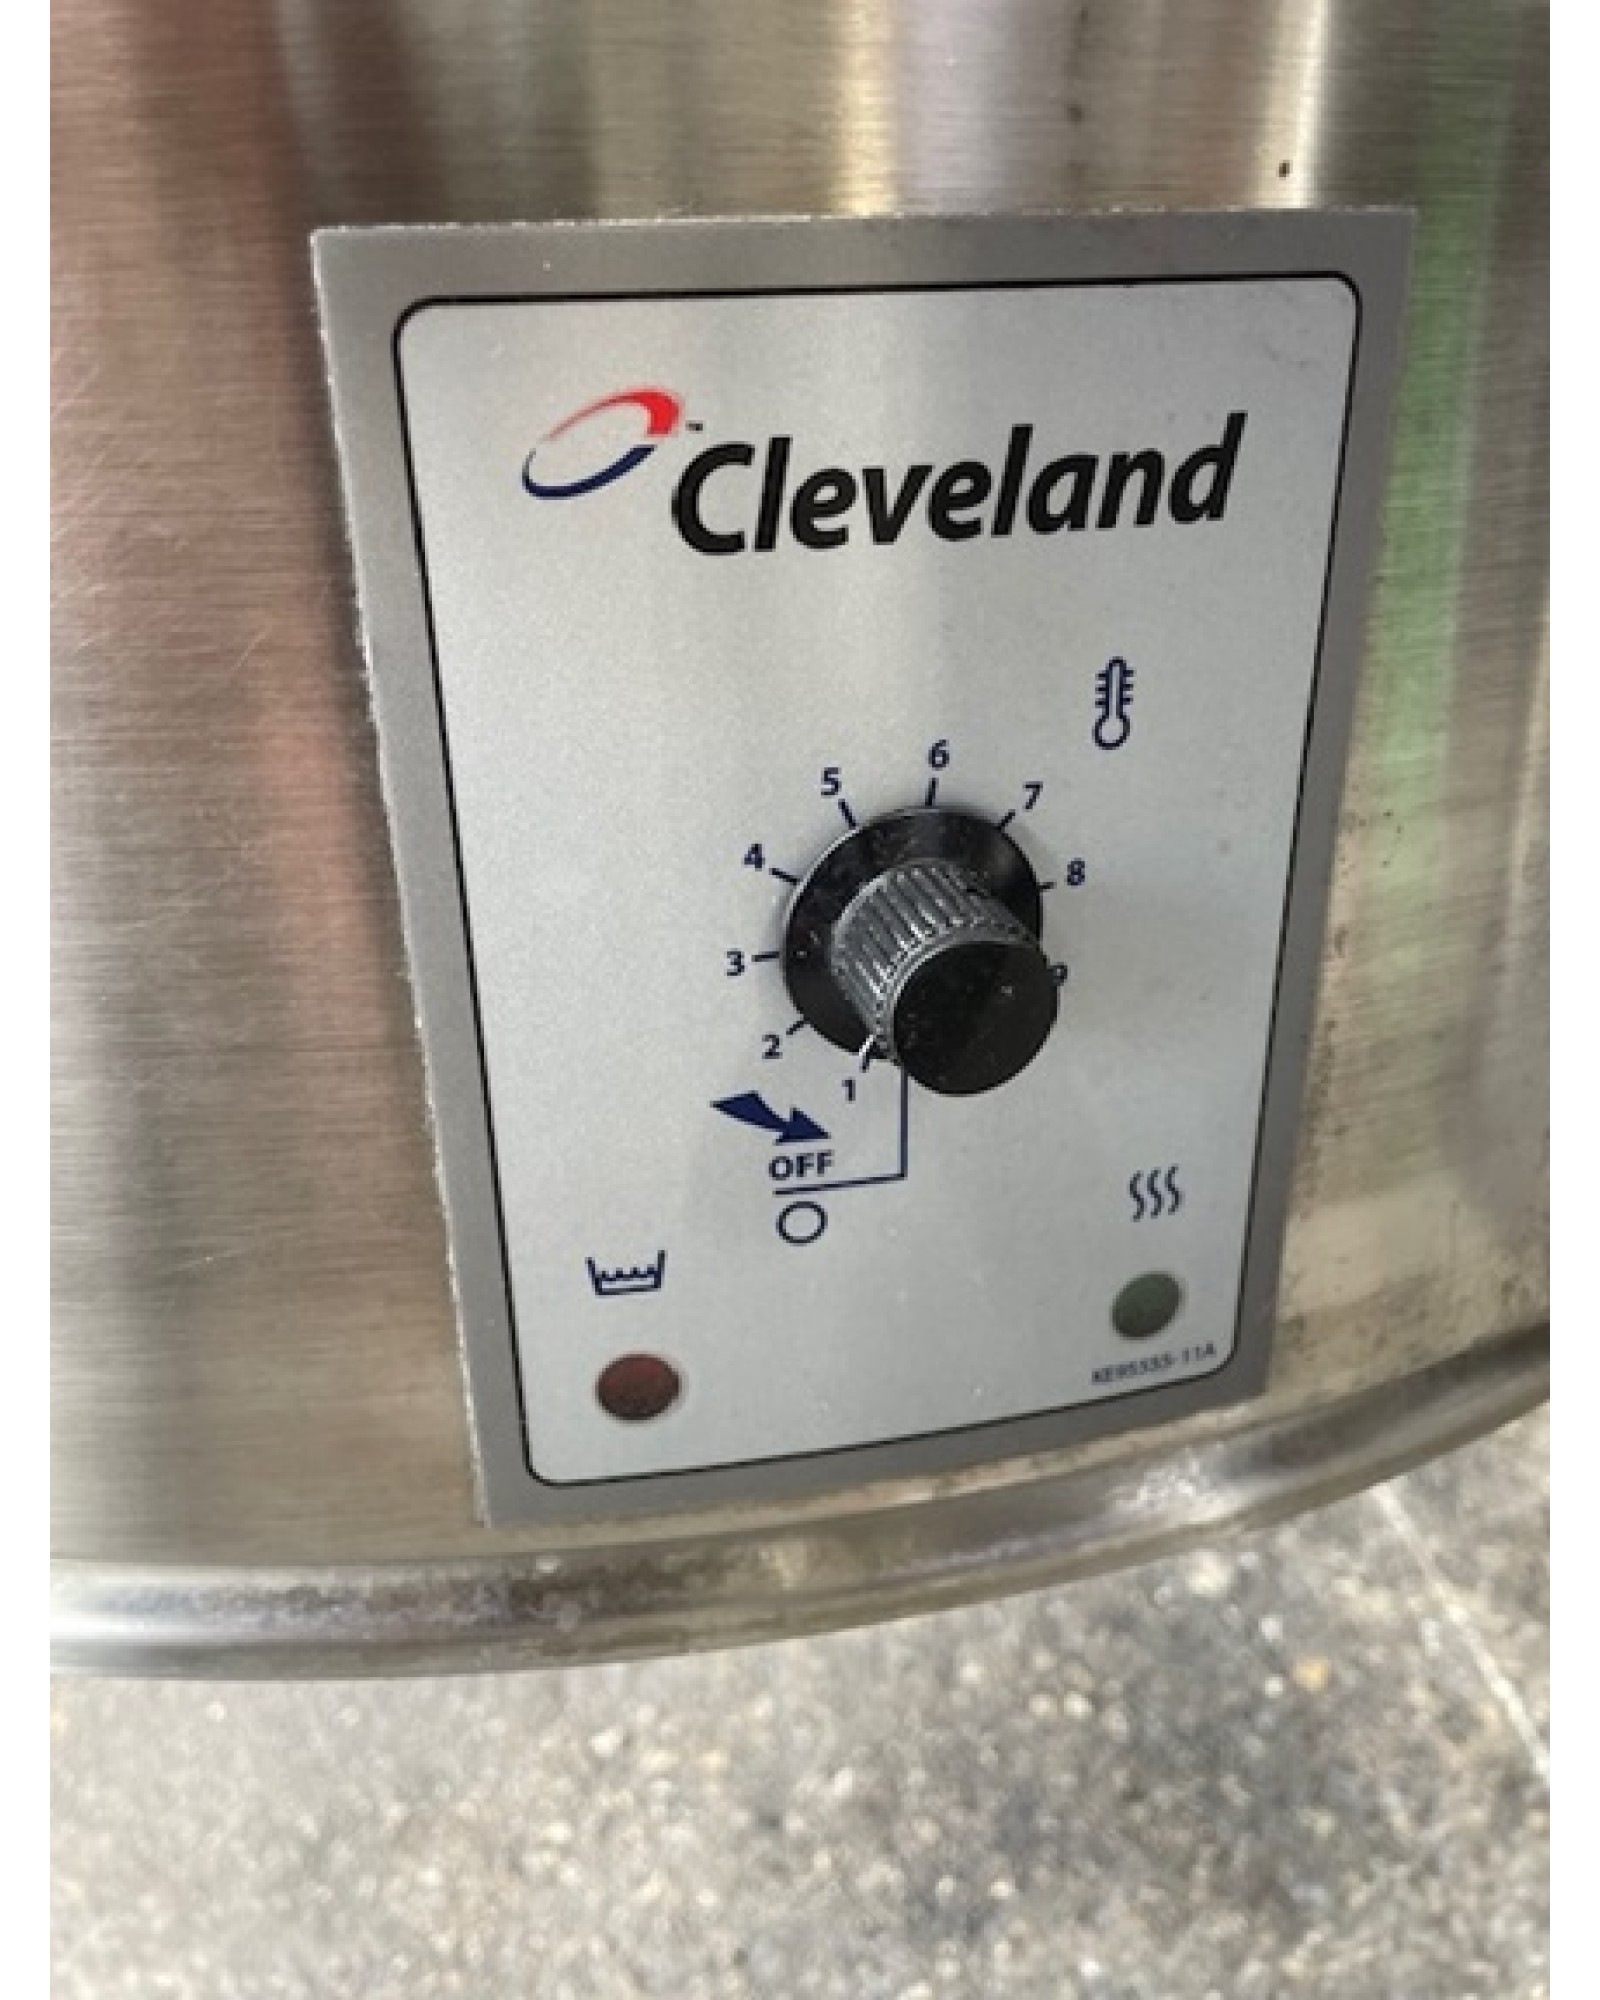 Cleveland 40 Gallon Tilting Kettle (USED)